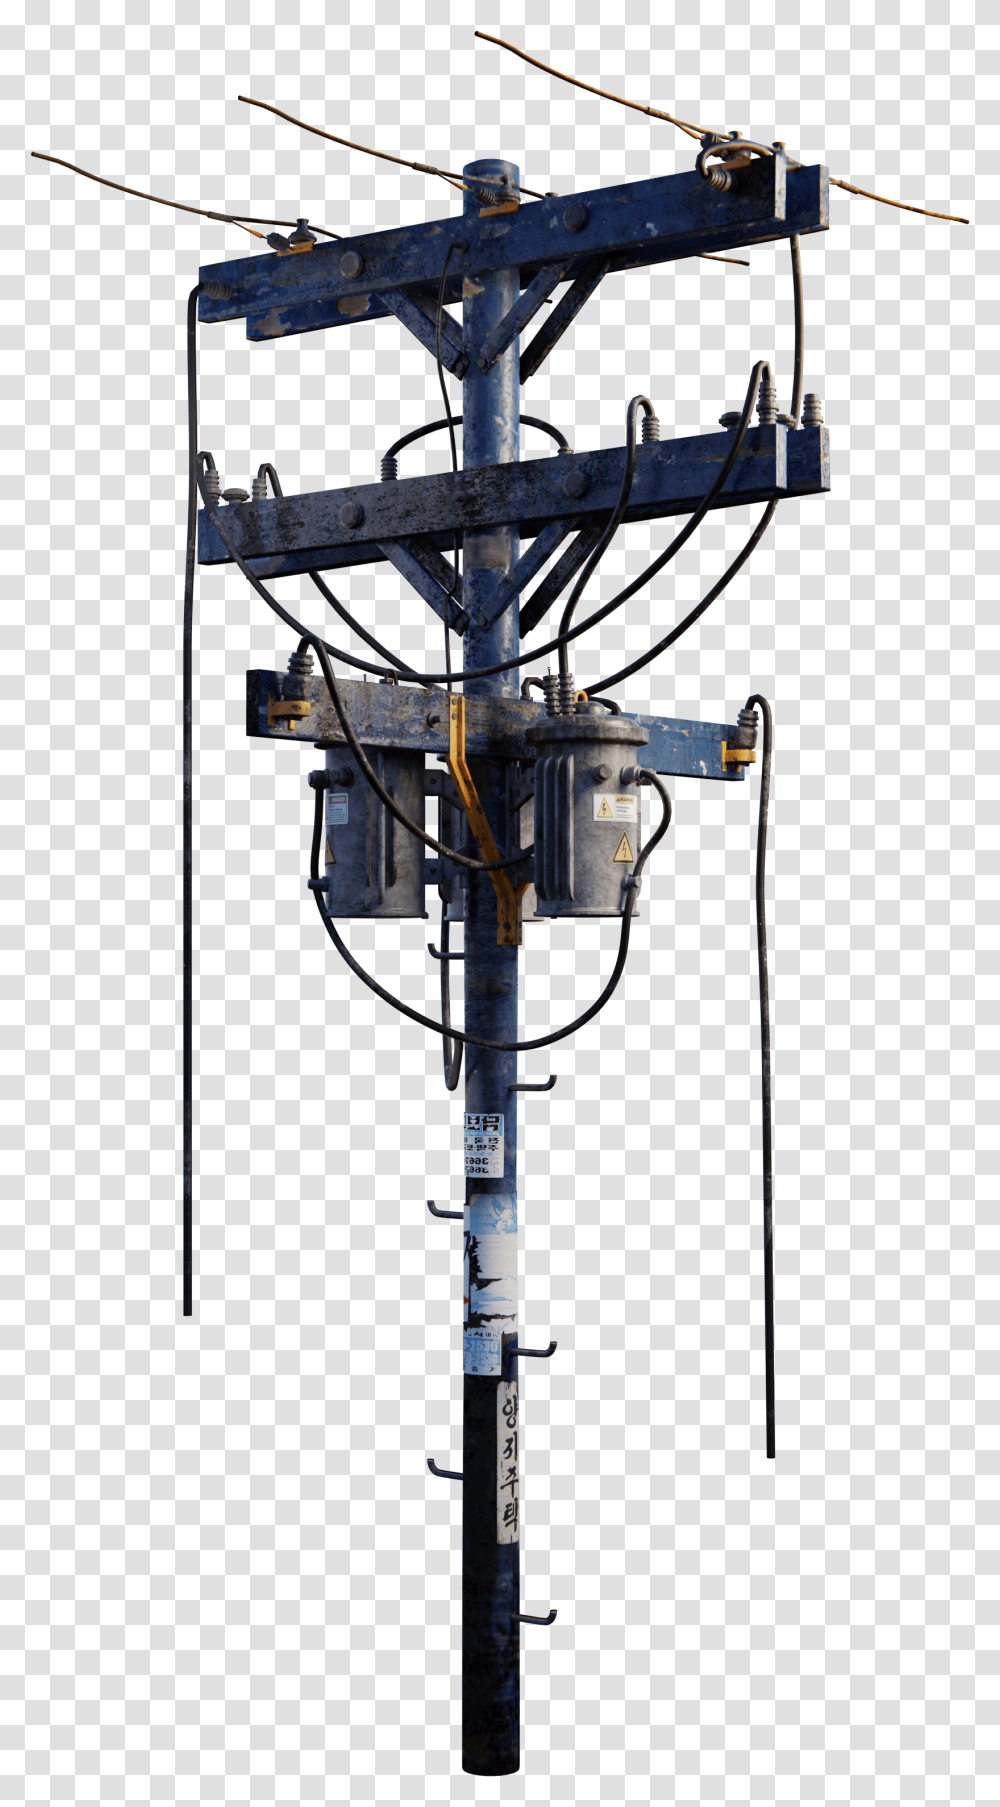 Electric Pole, Utility Pole, Cable, Power Lines, Electric Transmission Tower Transparent Png